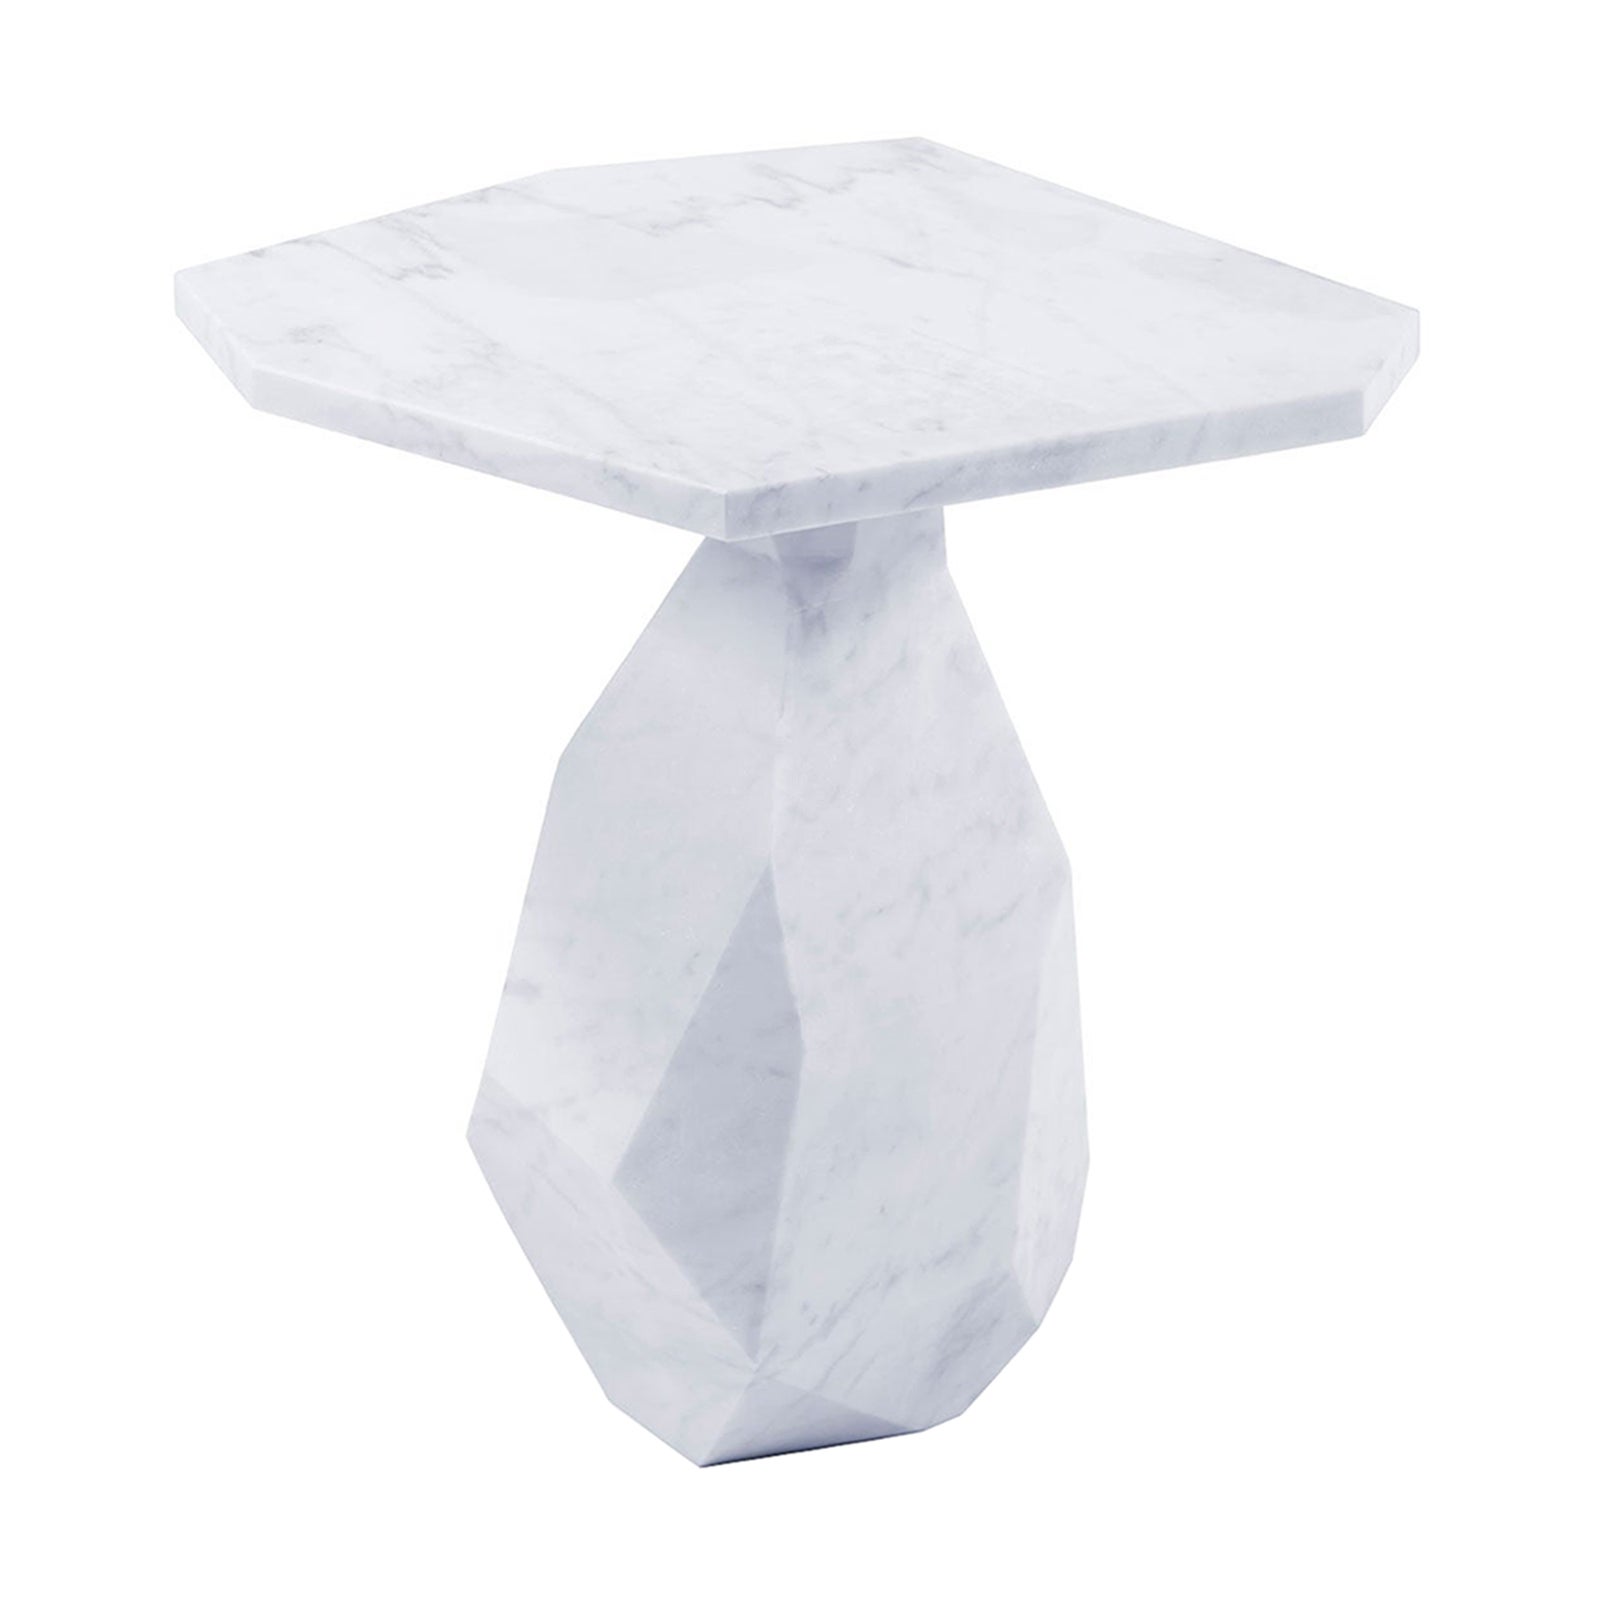 Contemporary Side Table Carved From Single Carrara Marble Block